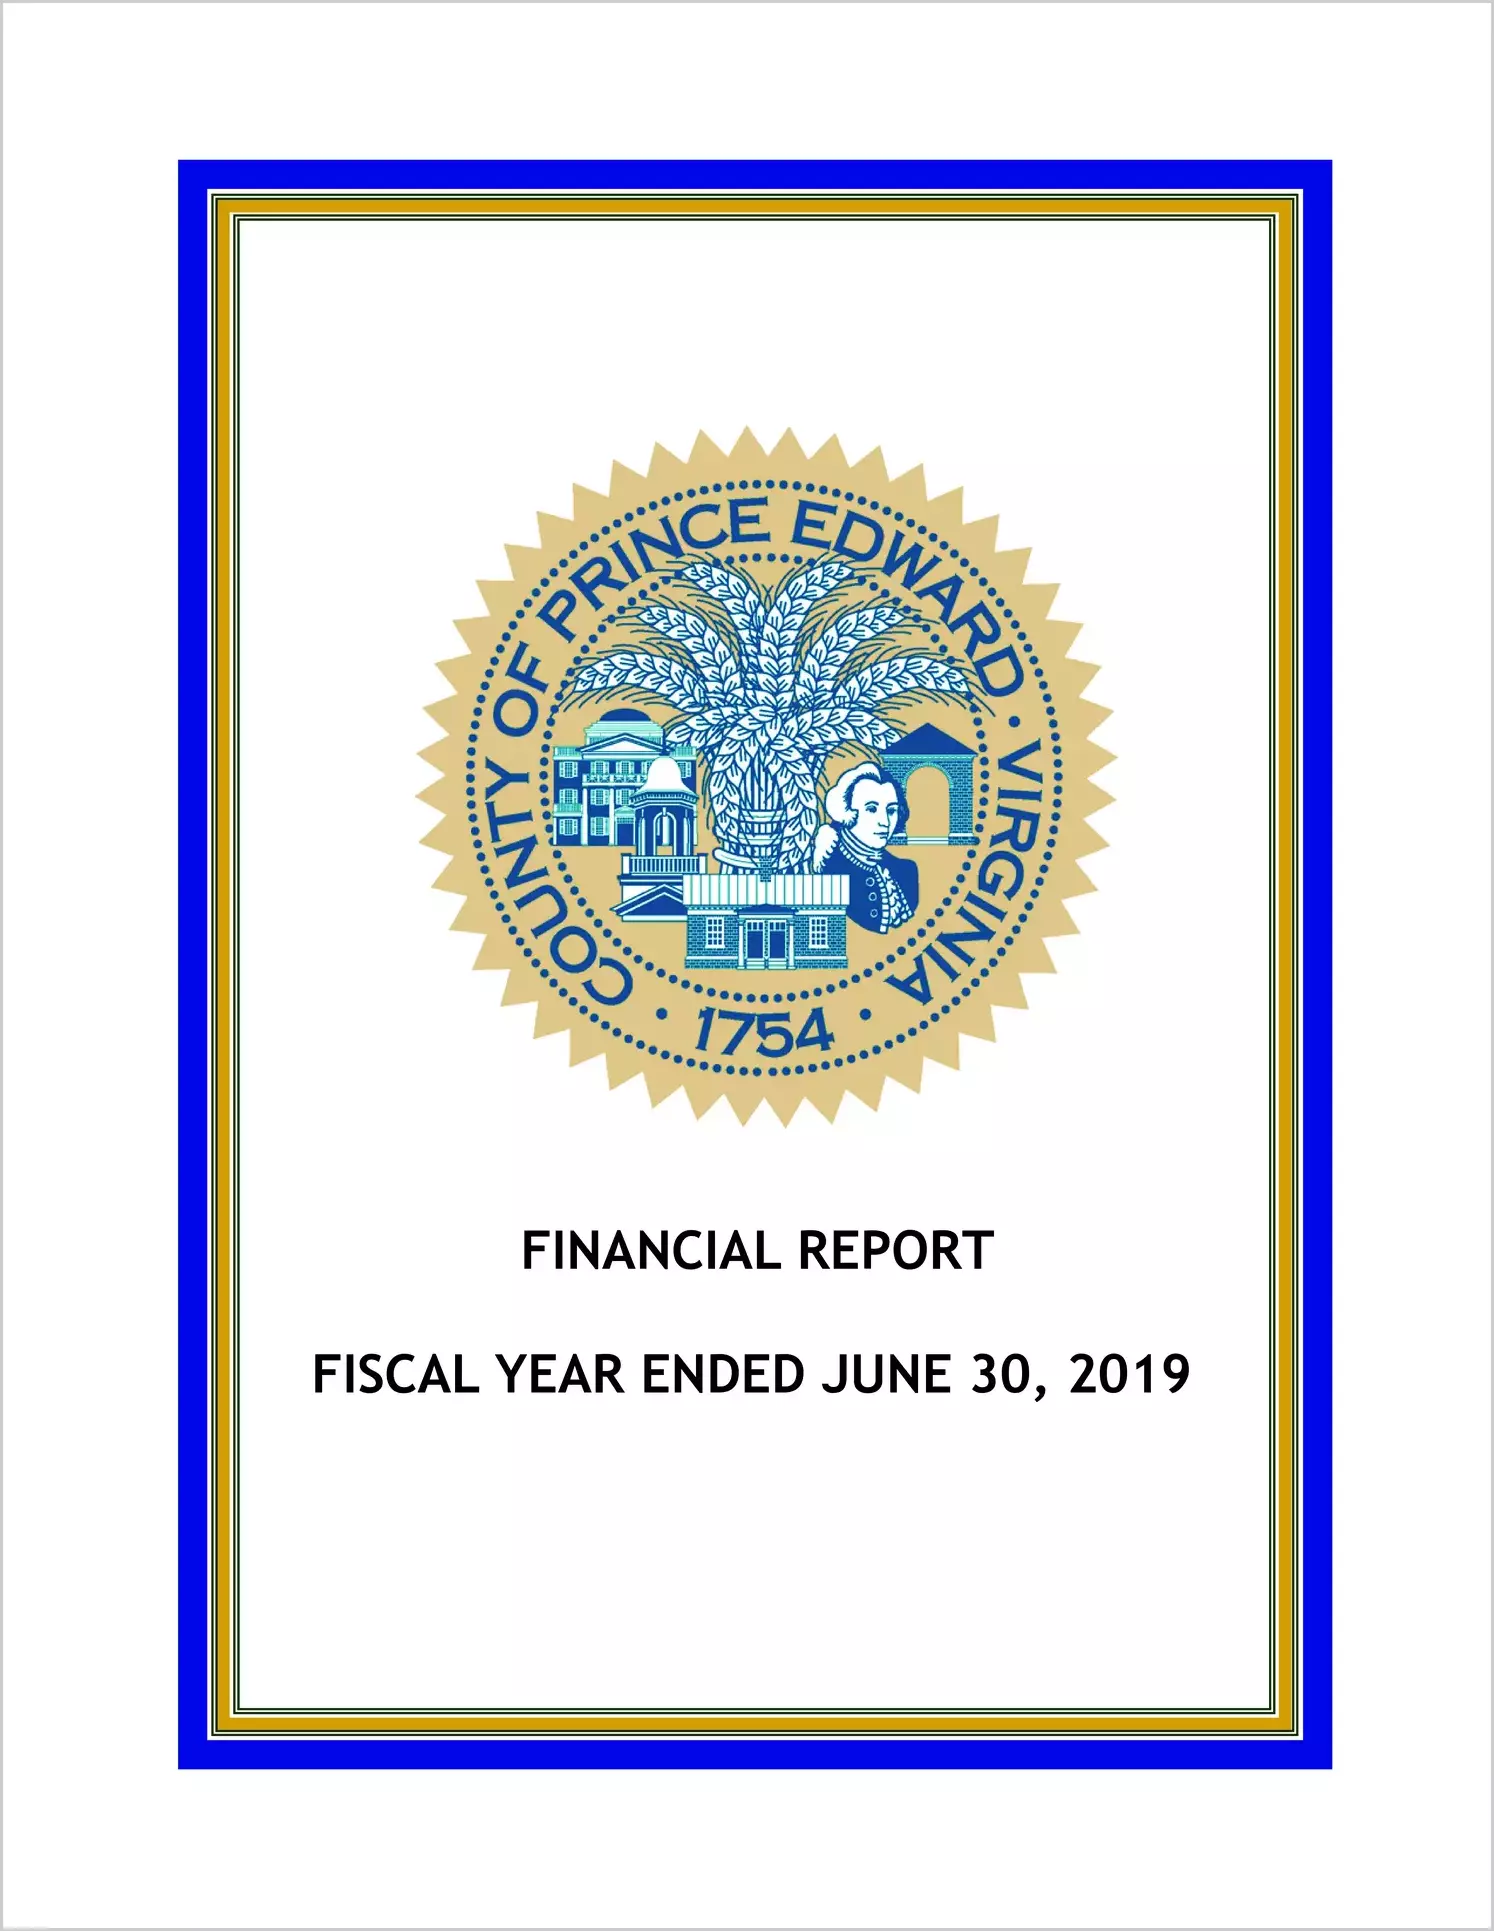 2019 Annual Financial Report for County of Prince Edward